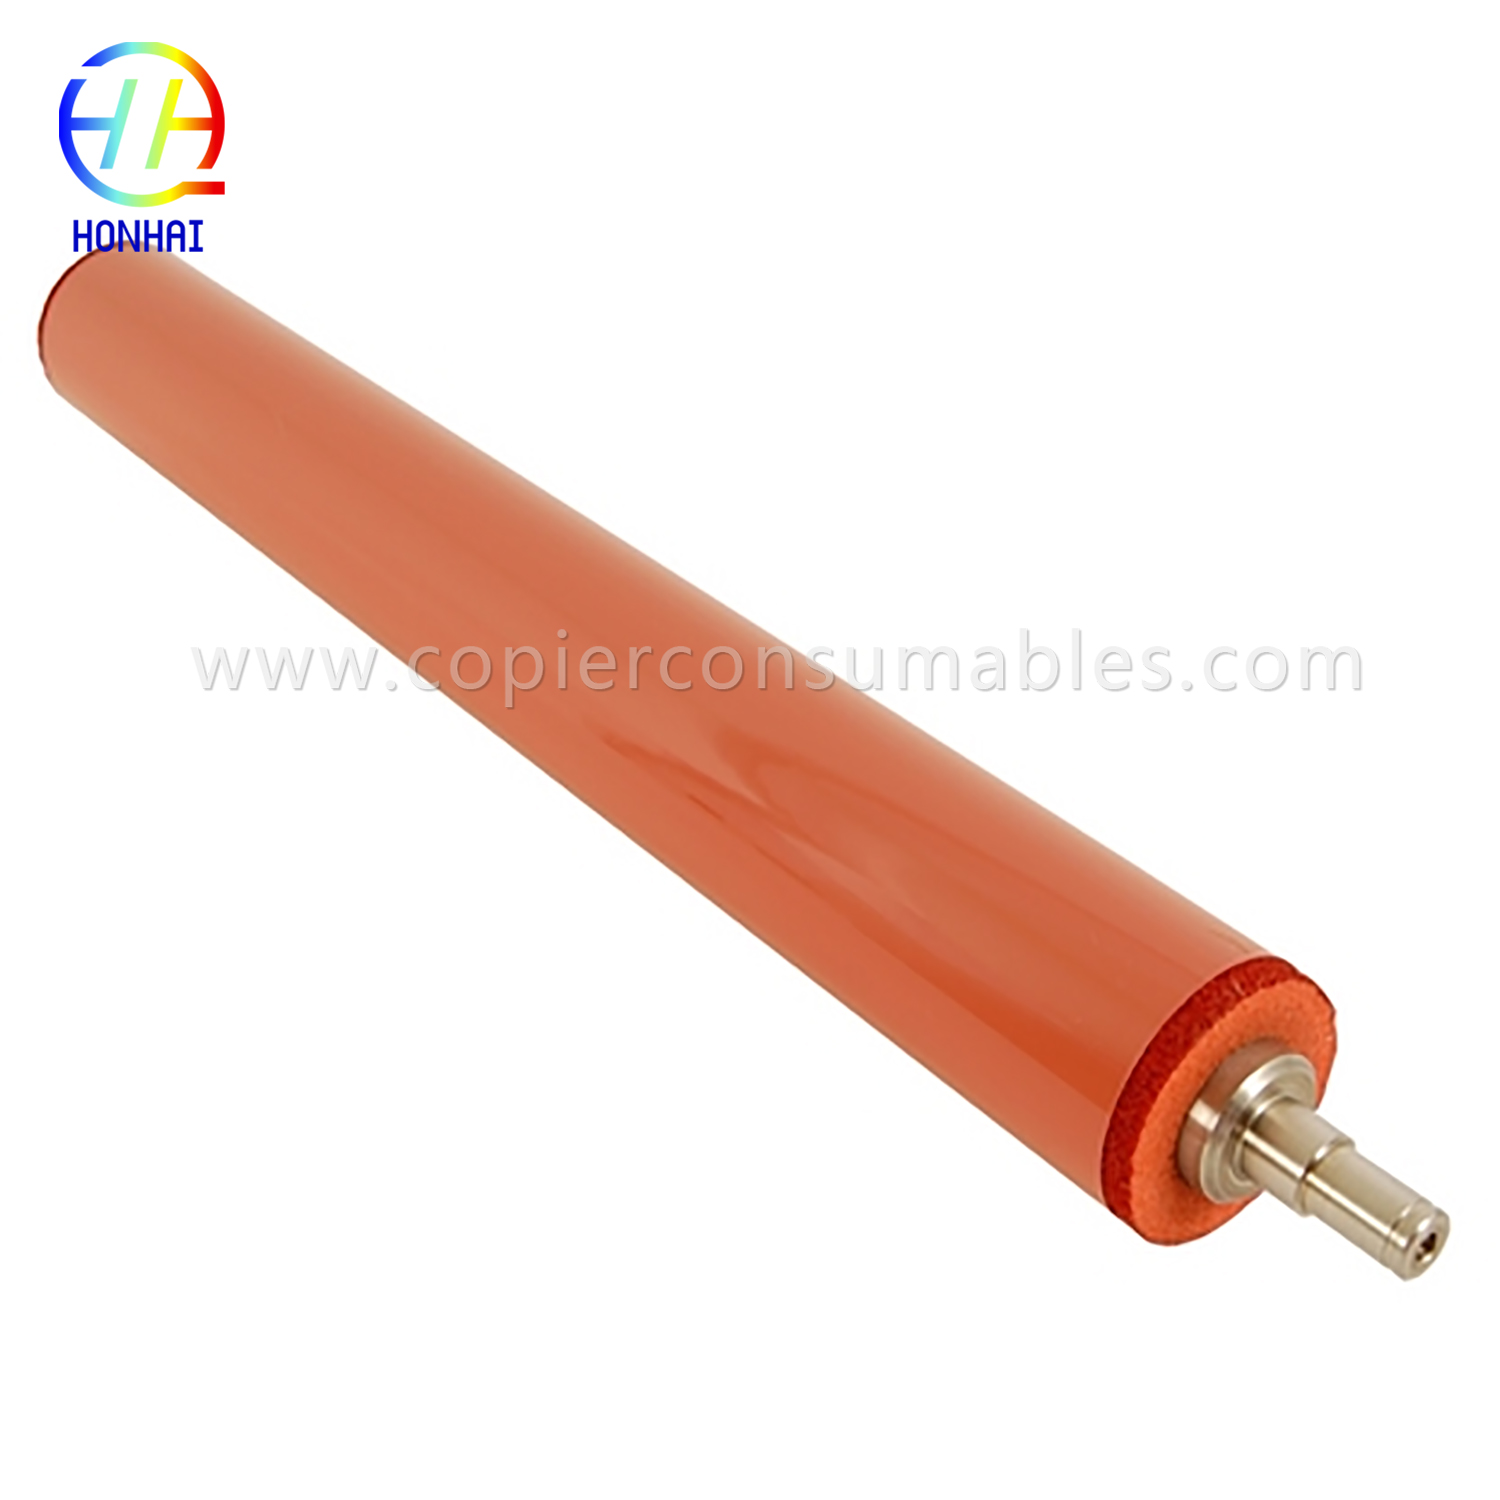 8 Year Exporter Extra Large Electric Hair Rollers - Fuser Heat Roller for Ricoh MPC4000 5000 AE010068 AE01-0068 OEM – HONHAI